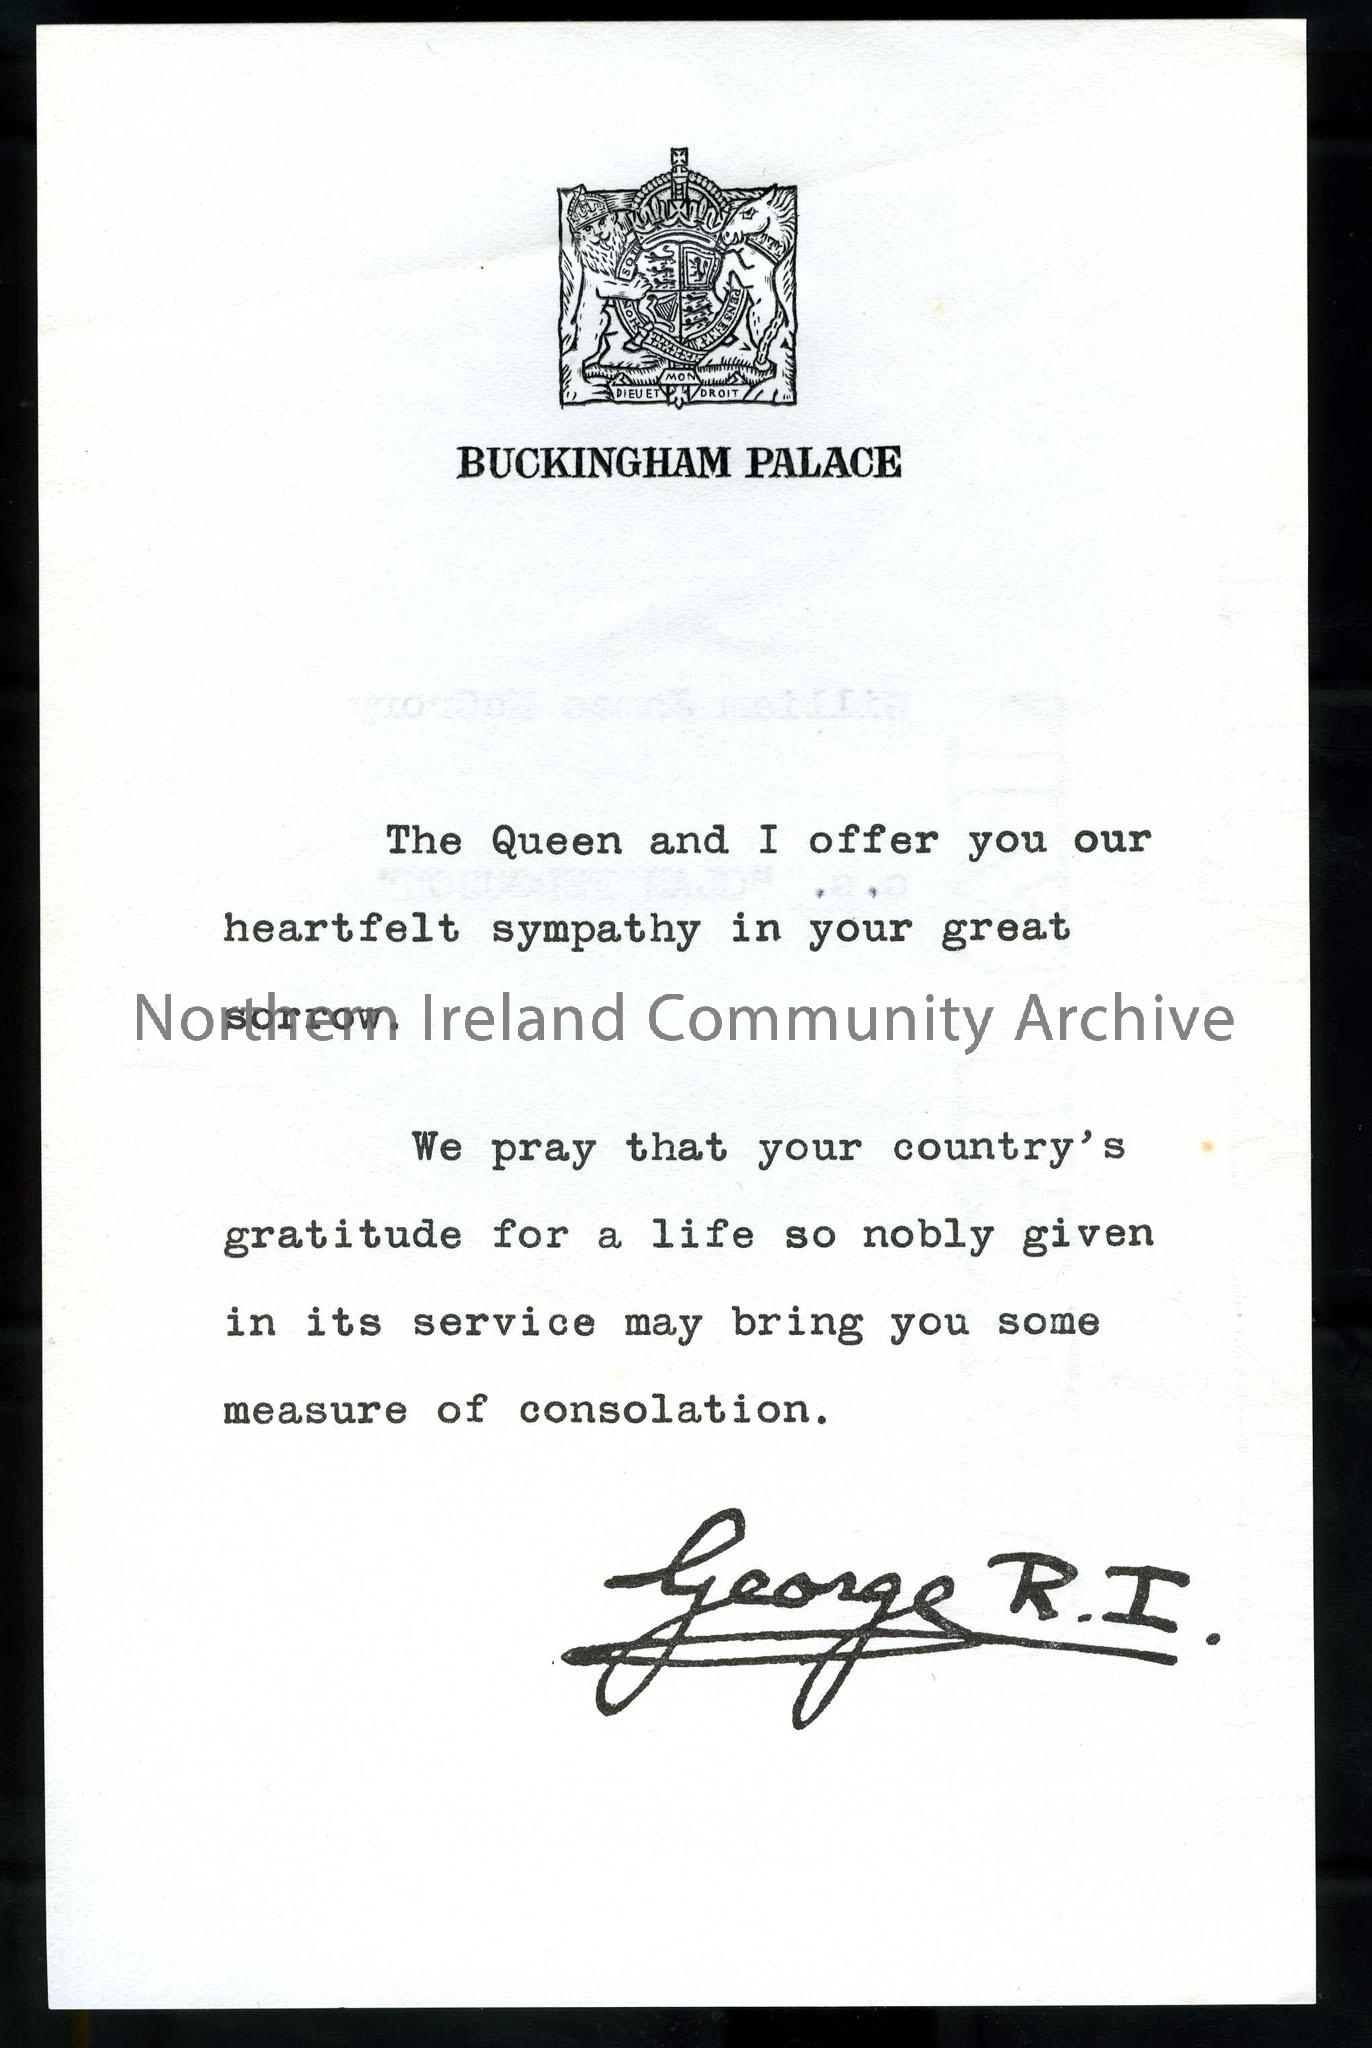 Letter from George R. I. Buckingham Palace. The Queen and King send their sympathy. On reverse William James McCrory, s.s. “Clan Ferguson”.  – Scan812